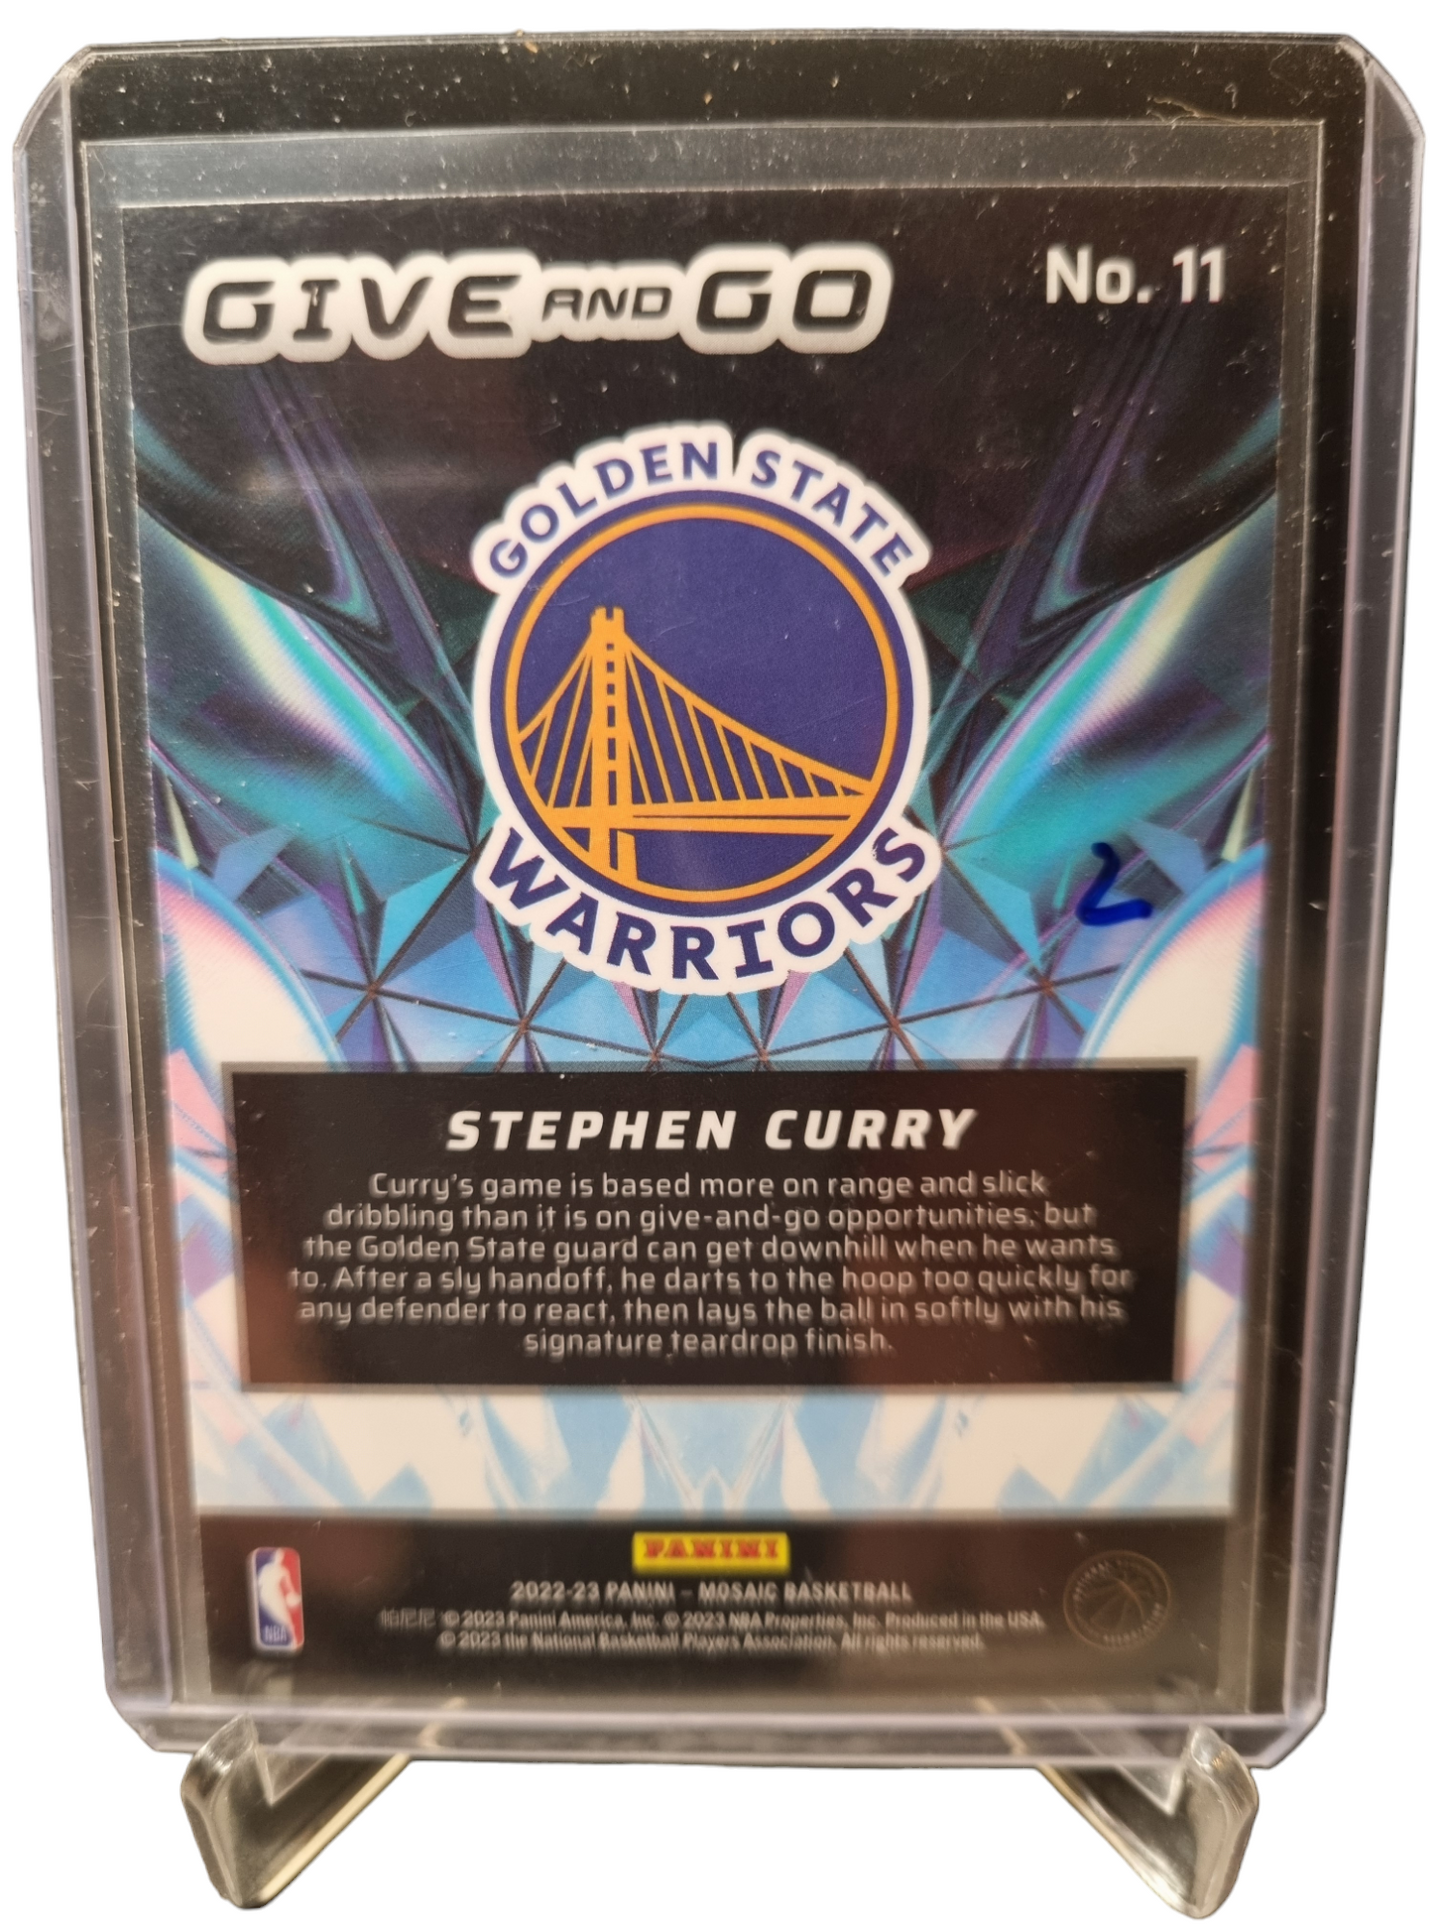 2022-23 Panini Mosaic #11 Stephen Curry Give And Go